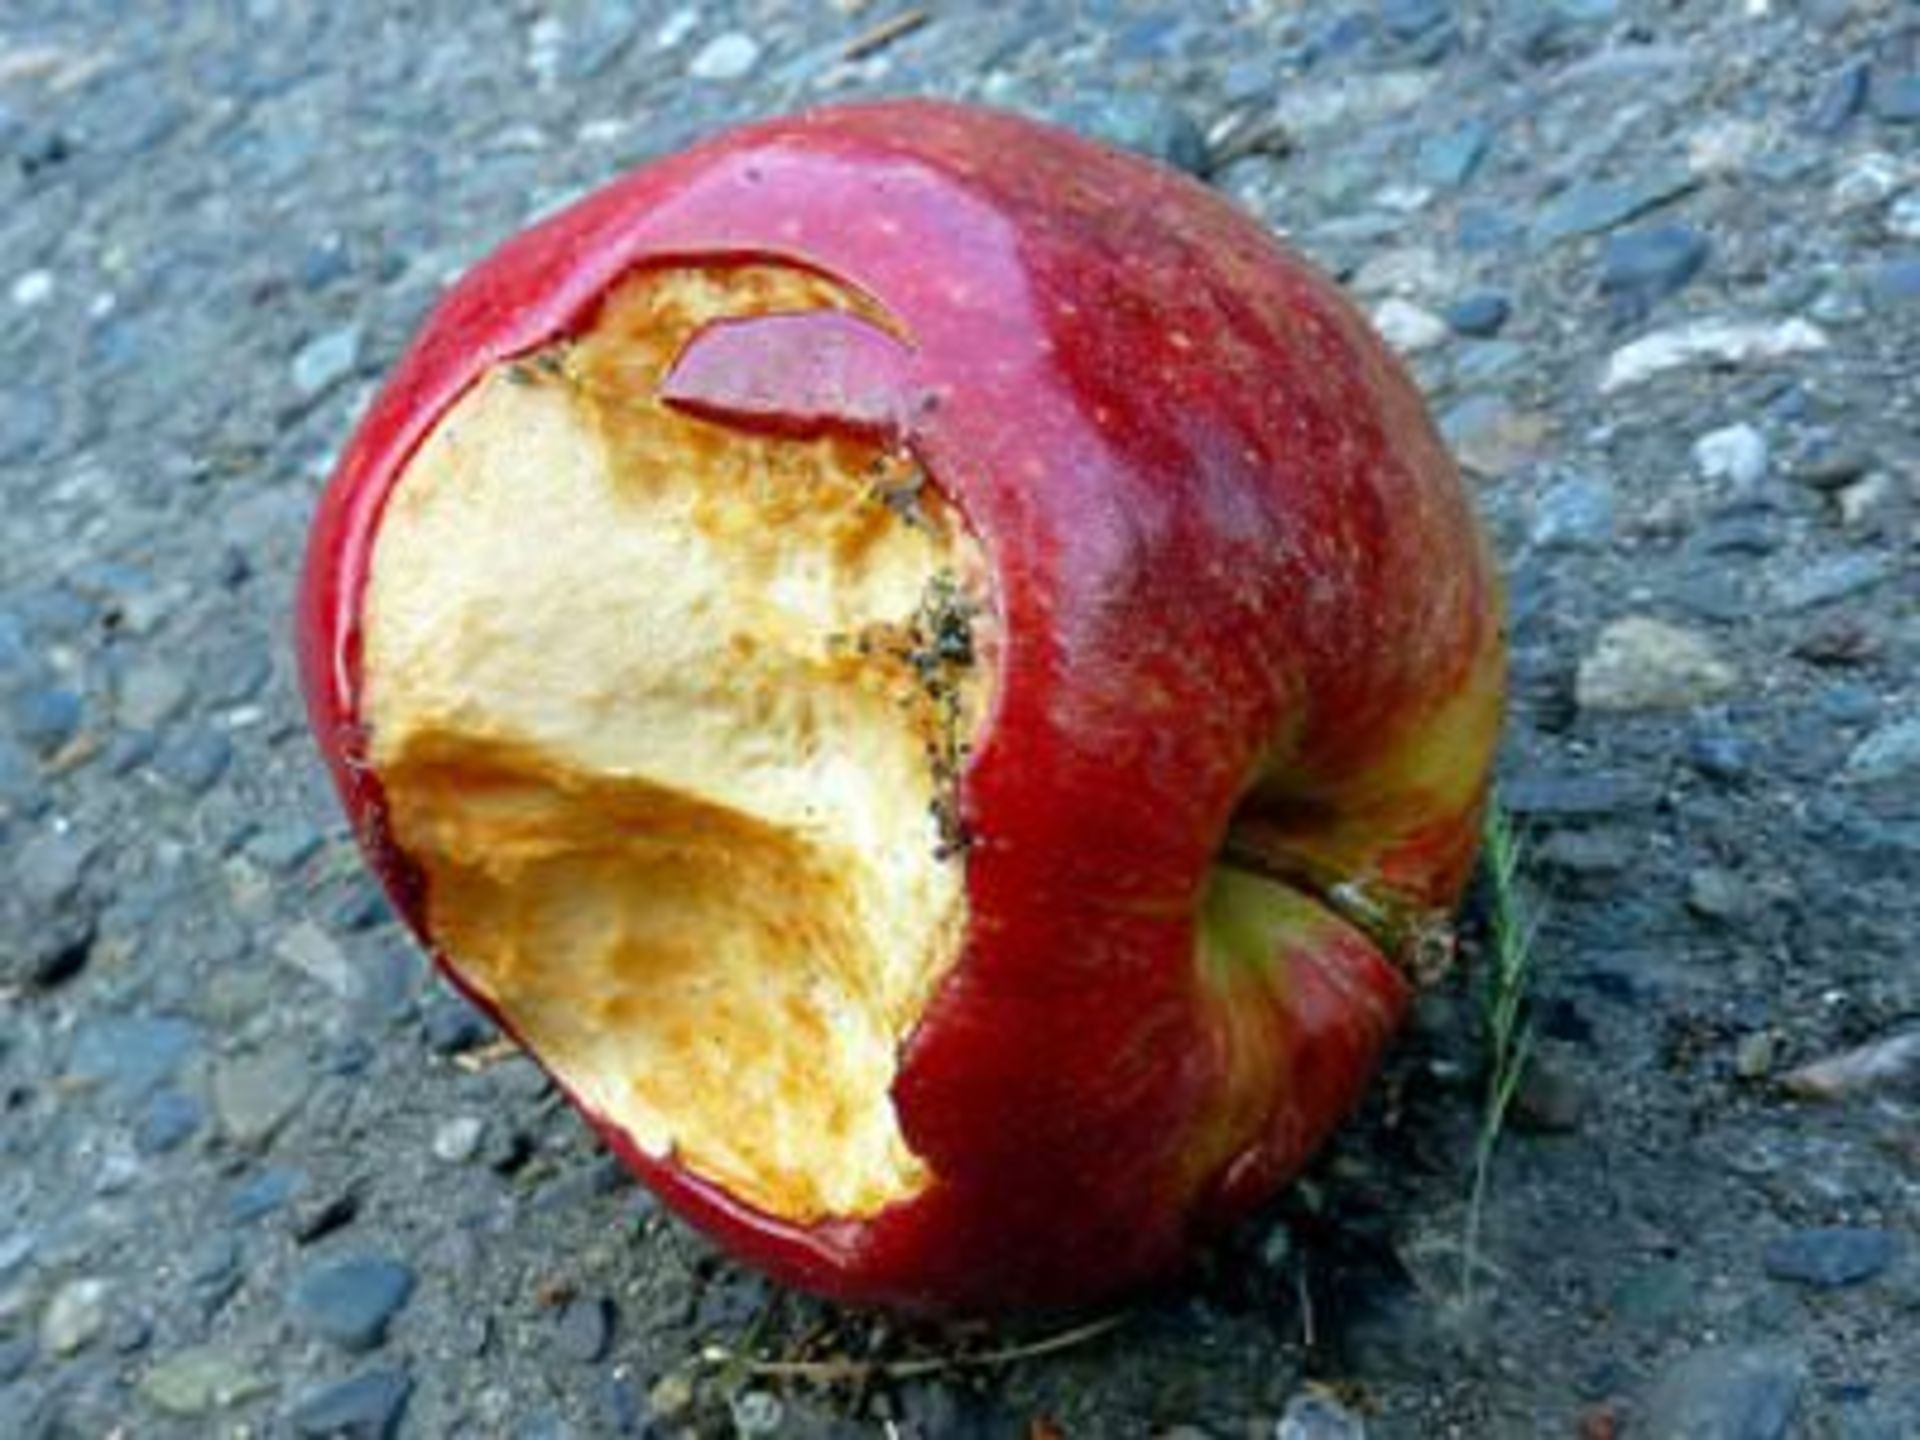 additionally-the-publics-perception-of-apple-is-not-as-good-as-it-once-was